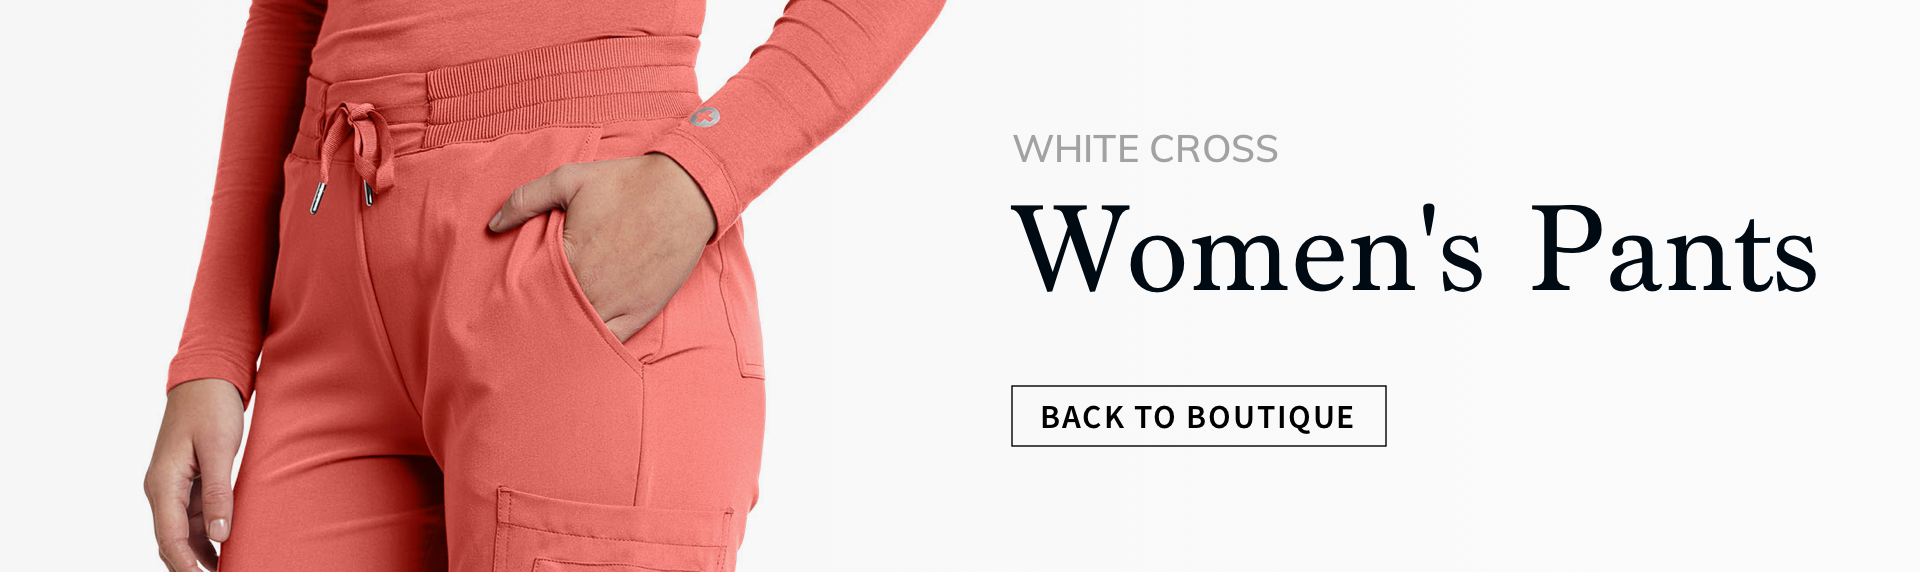 viewing white cross women's pants. click to go back to boutique.